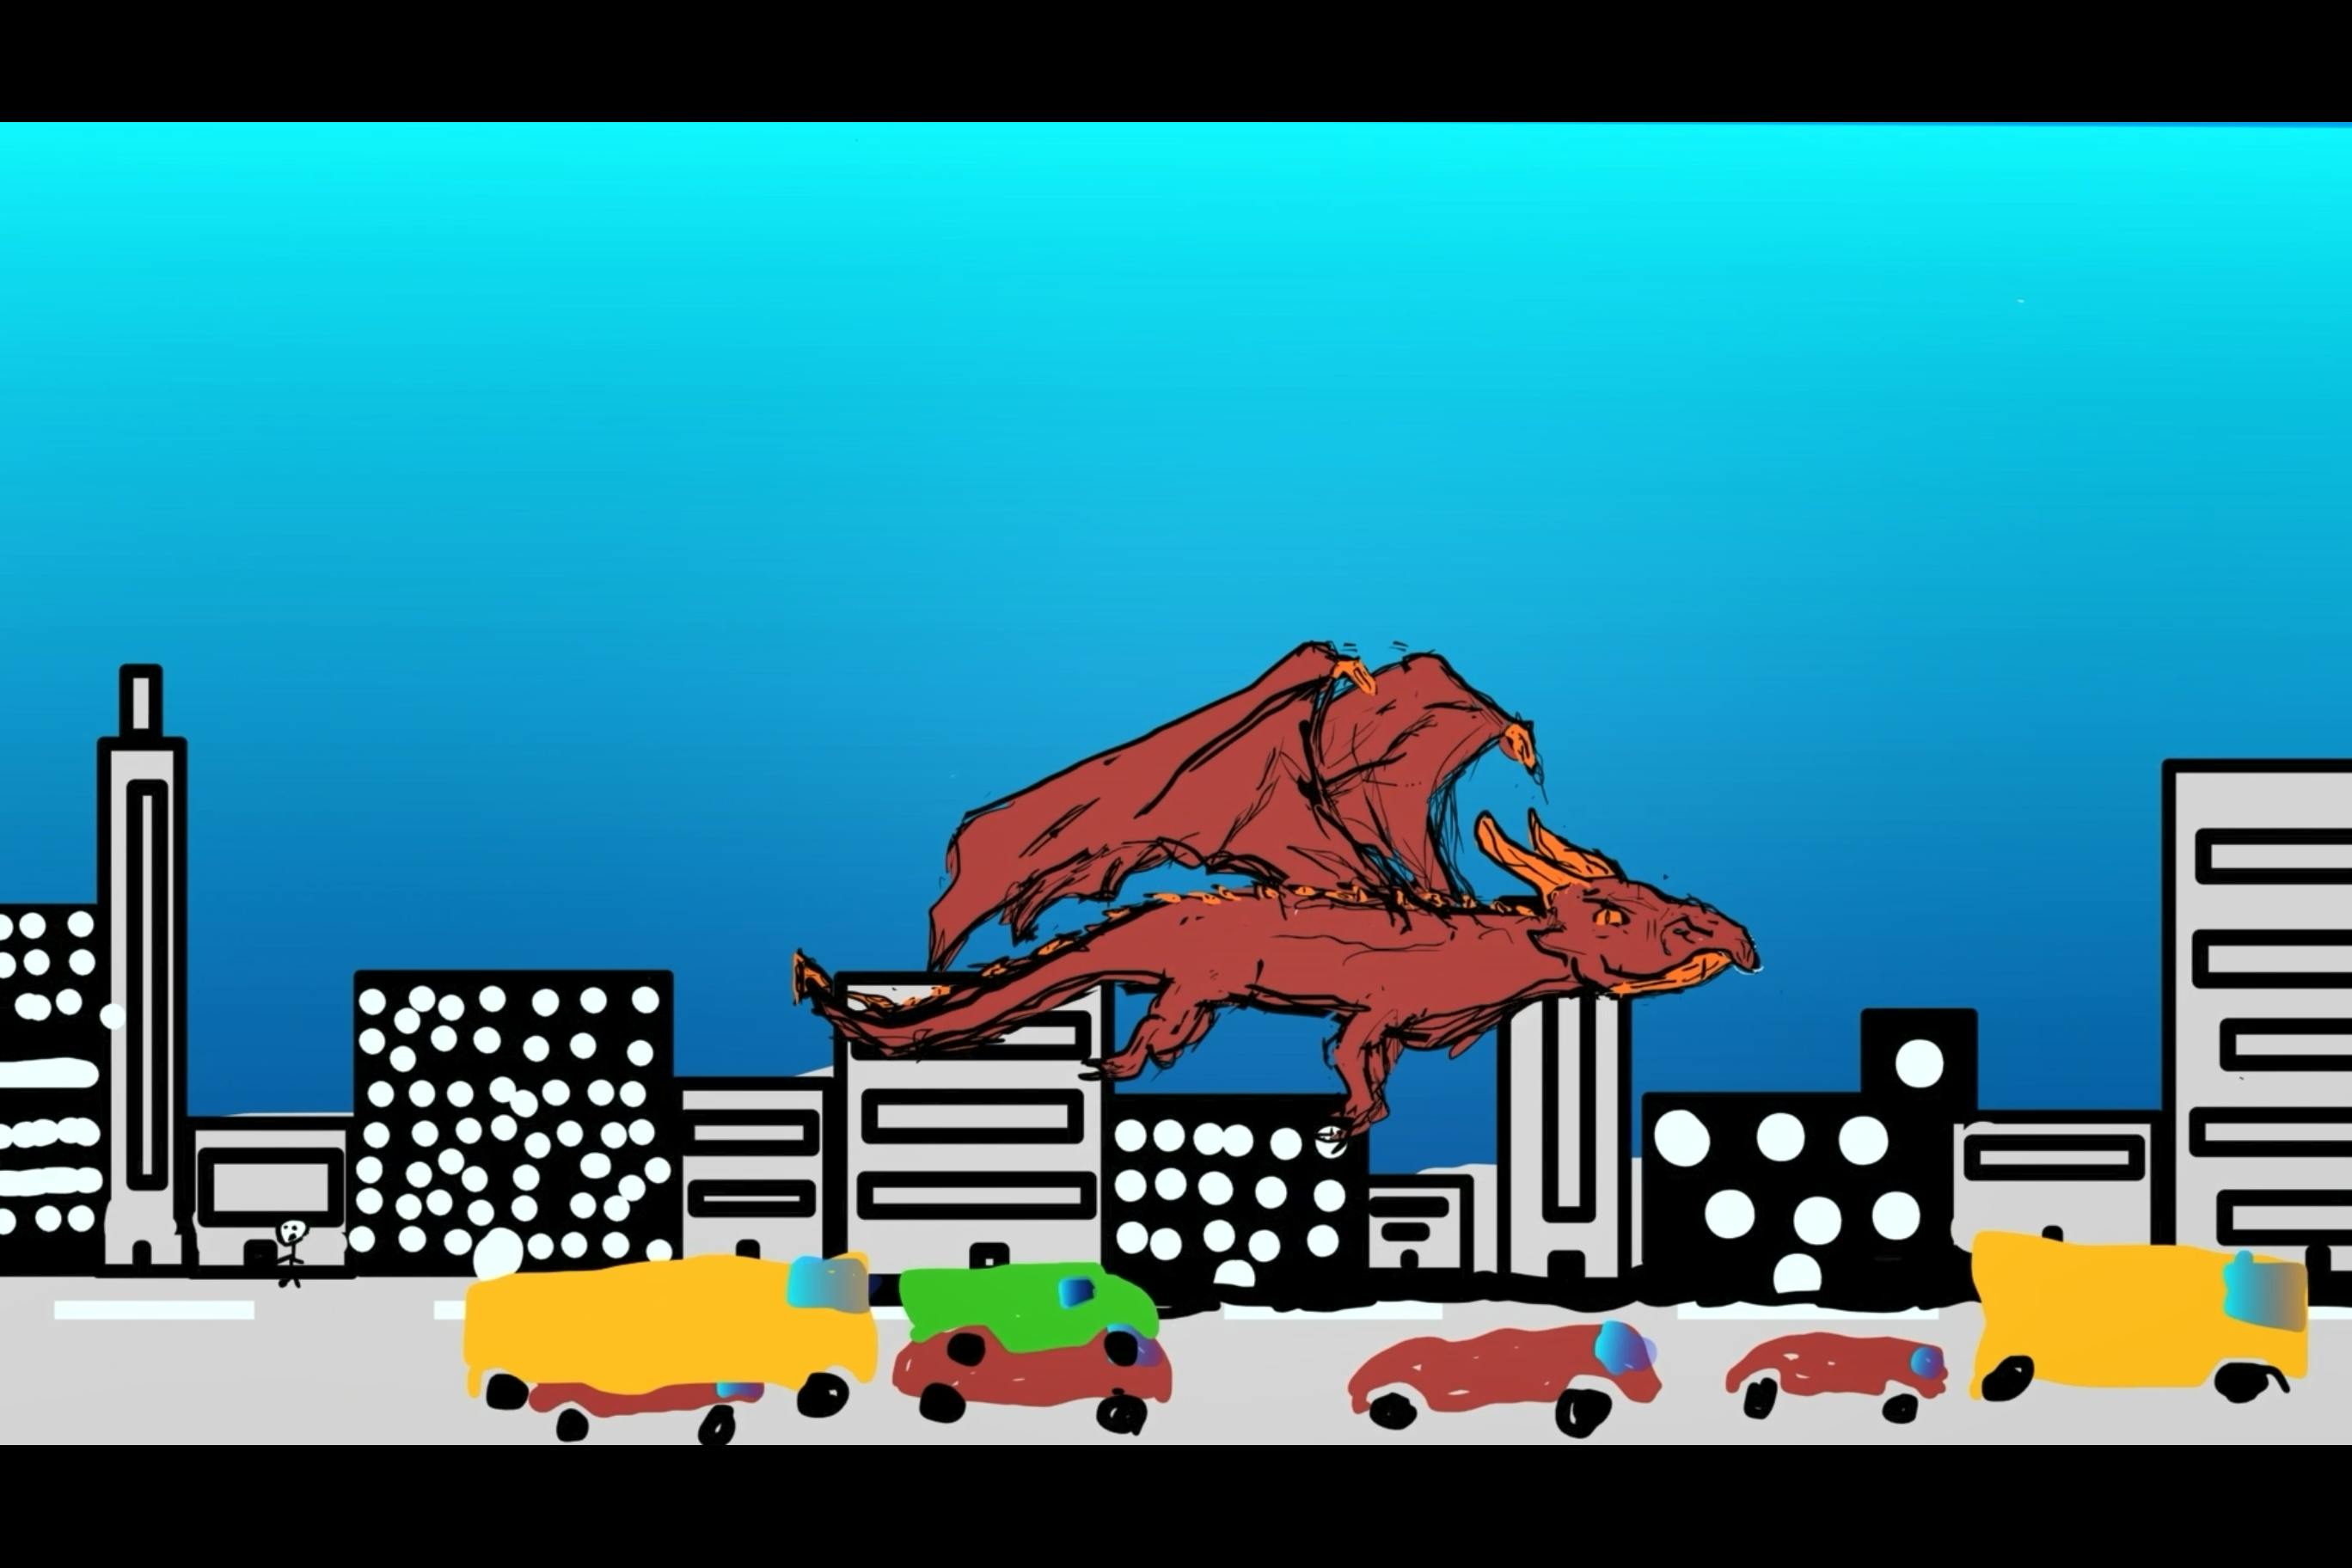 an illustration on Toon Boom of a red dragon flying through a city with cars. 